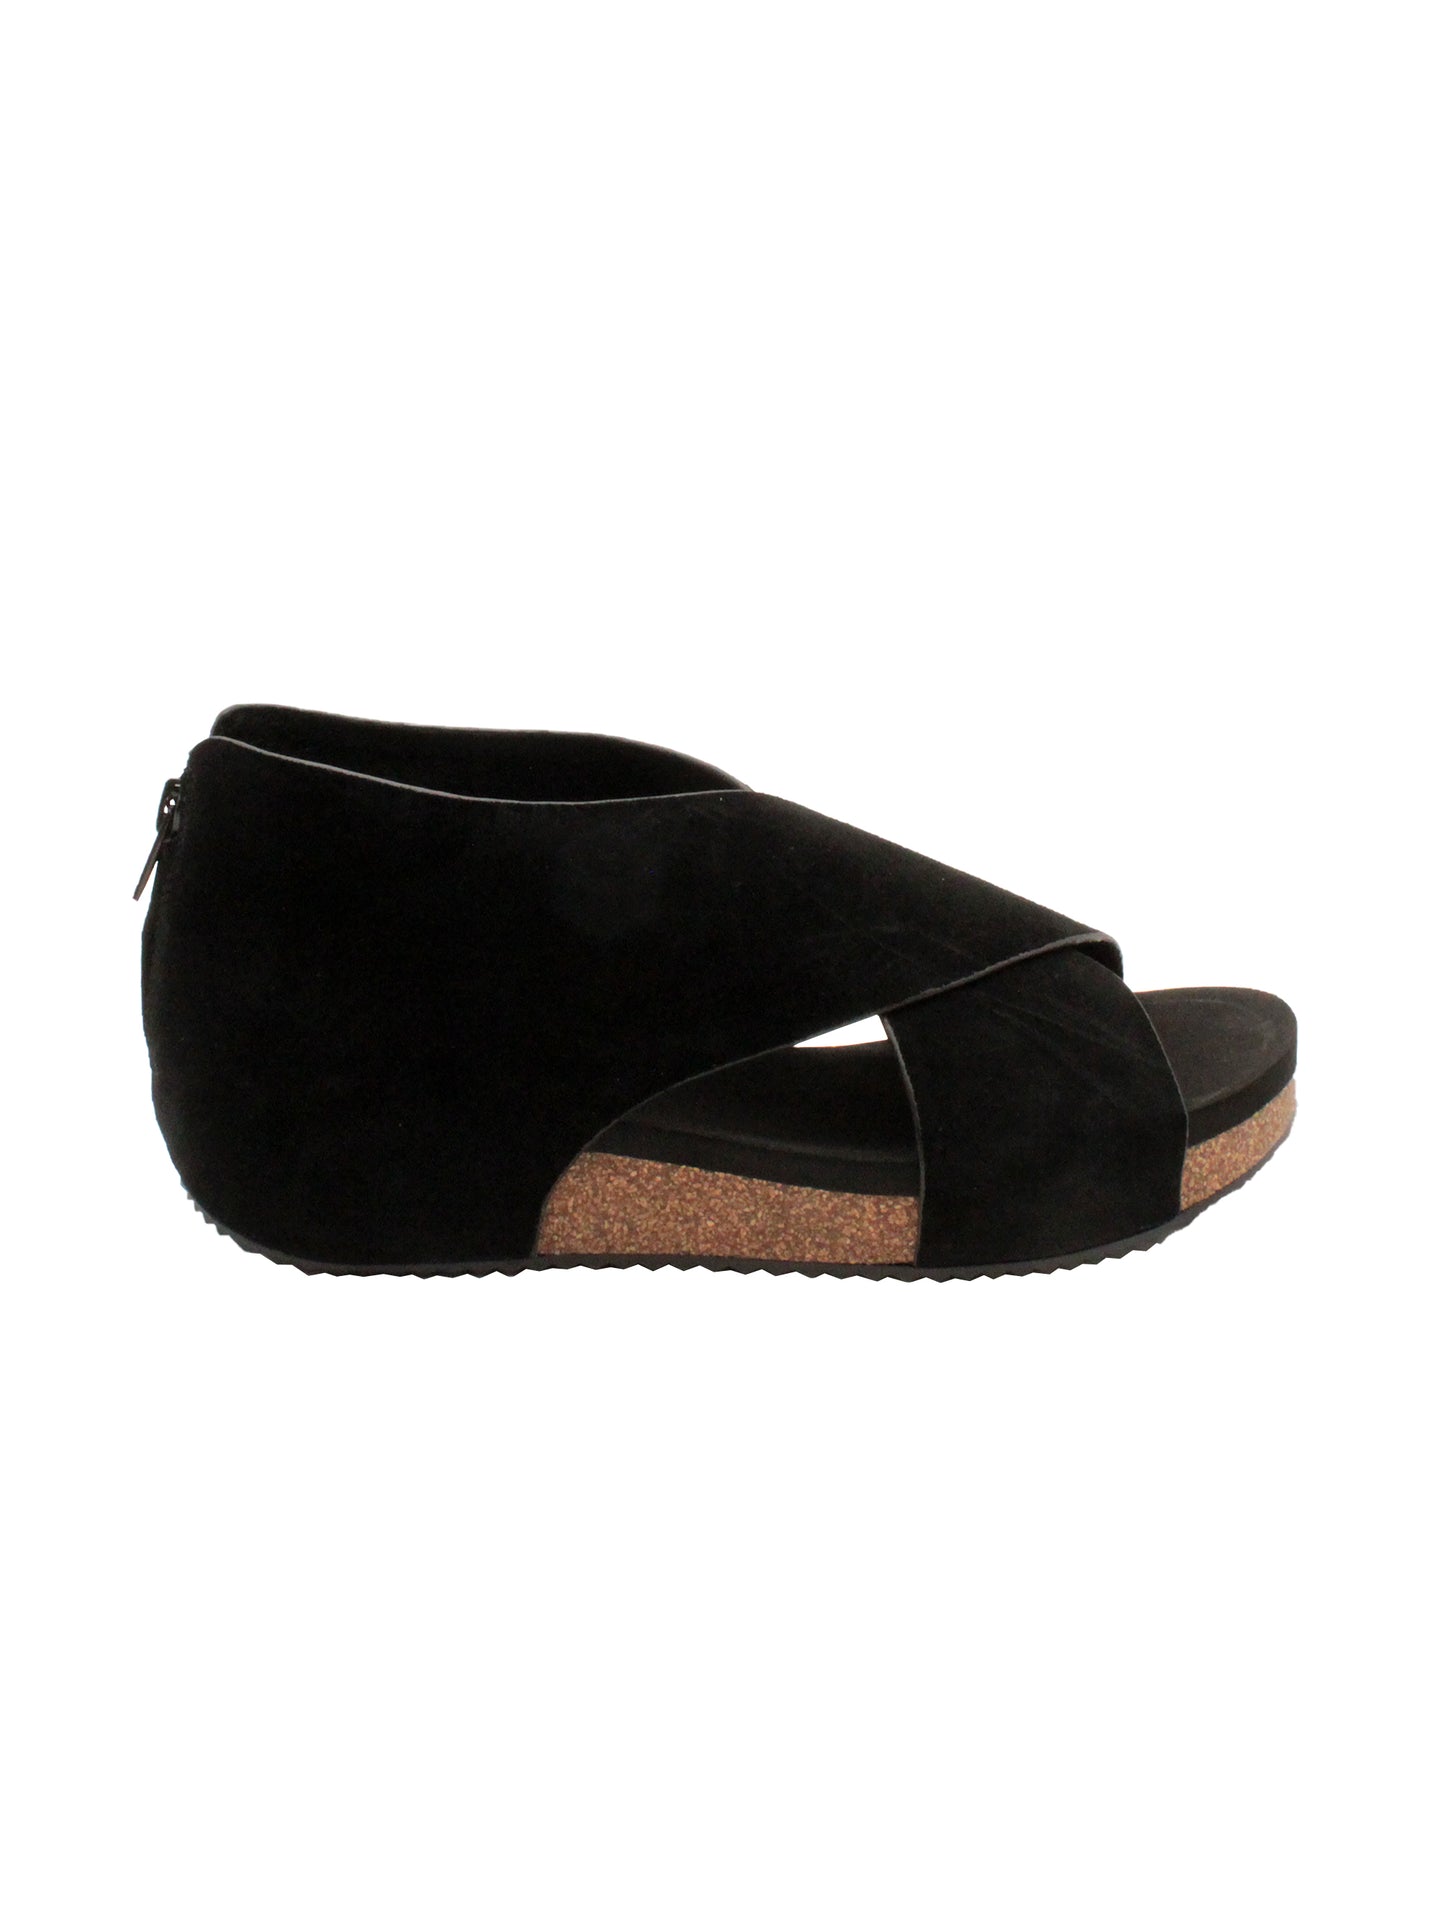 The ‘Alton’ black sandals by Volatile are made from plush genuine suede and designed with crisscross straps that meet in the back for a closed-but-open effect suitable for year-round styling. Featuring Volatile’s signature ultra-comfort EVA insole stationed on a modest low wedge, and durable, non-skid rubber traction soles, these are ideal for all day walking. side